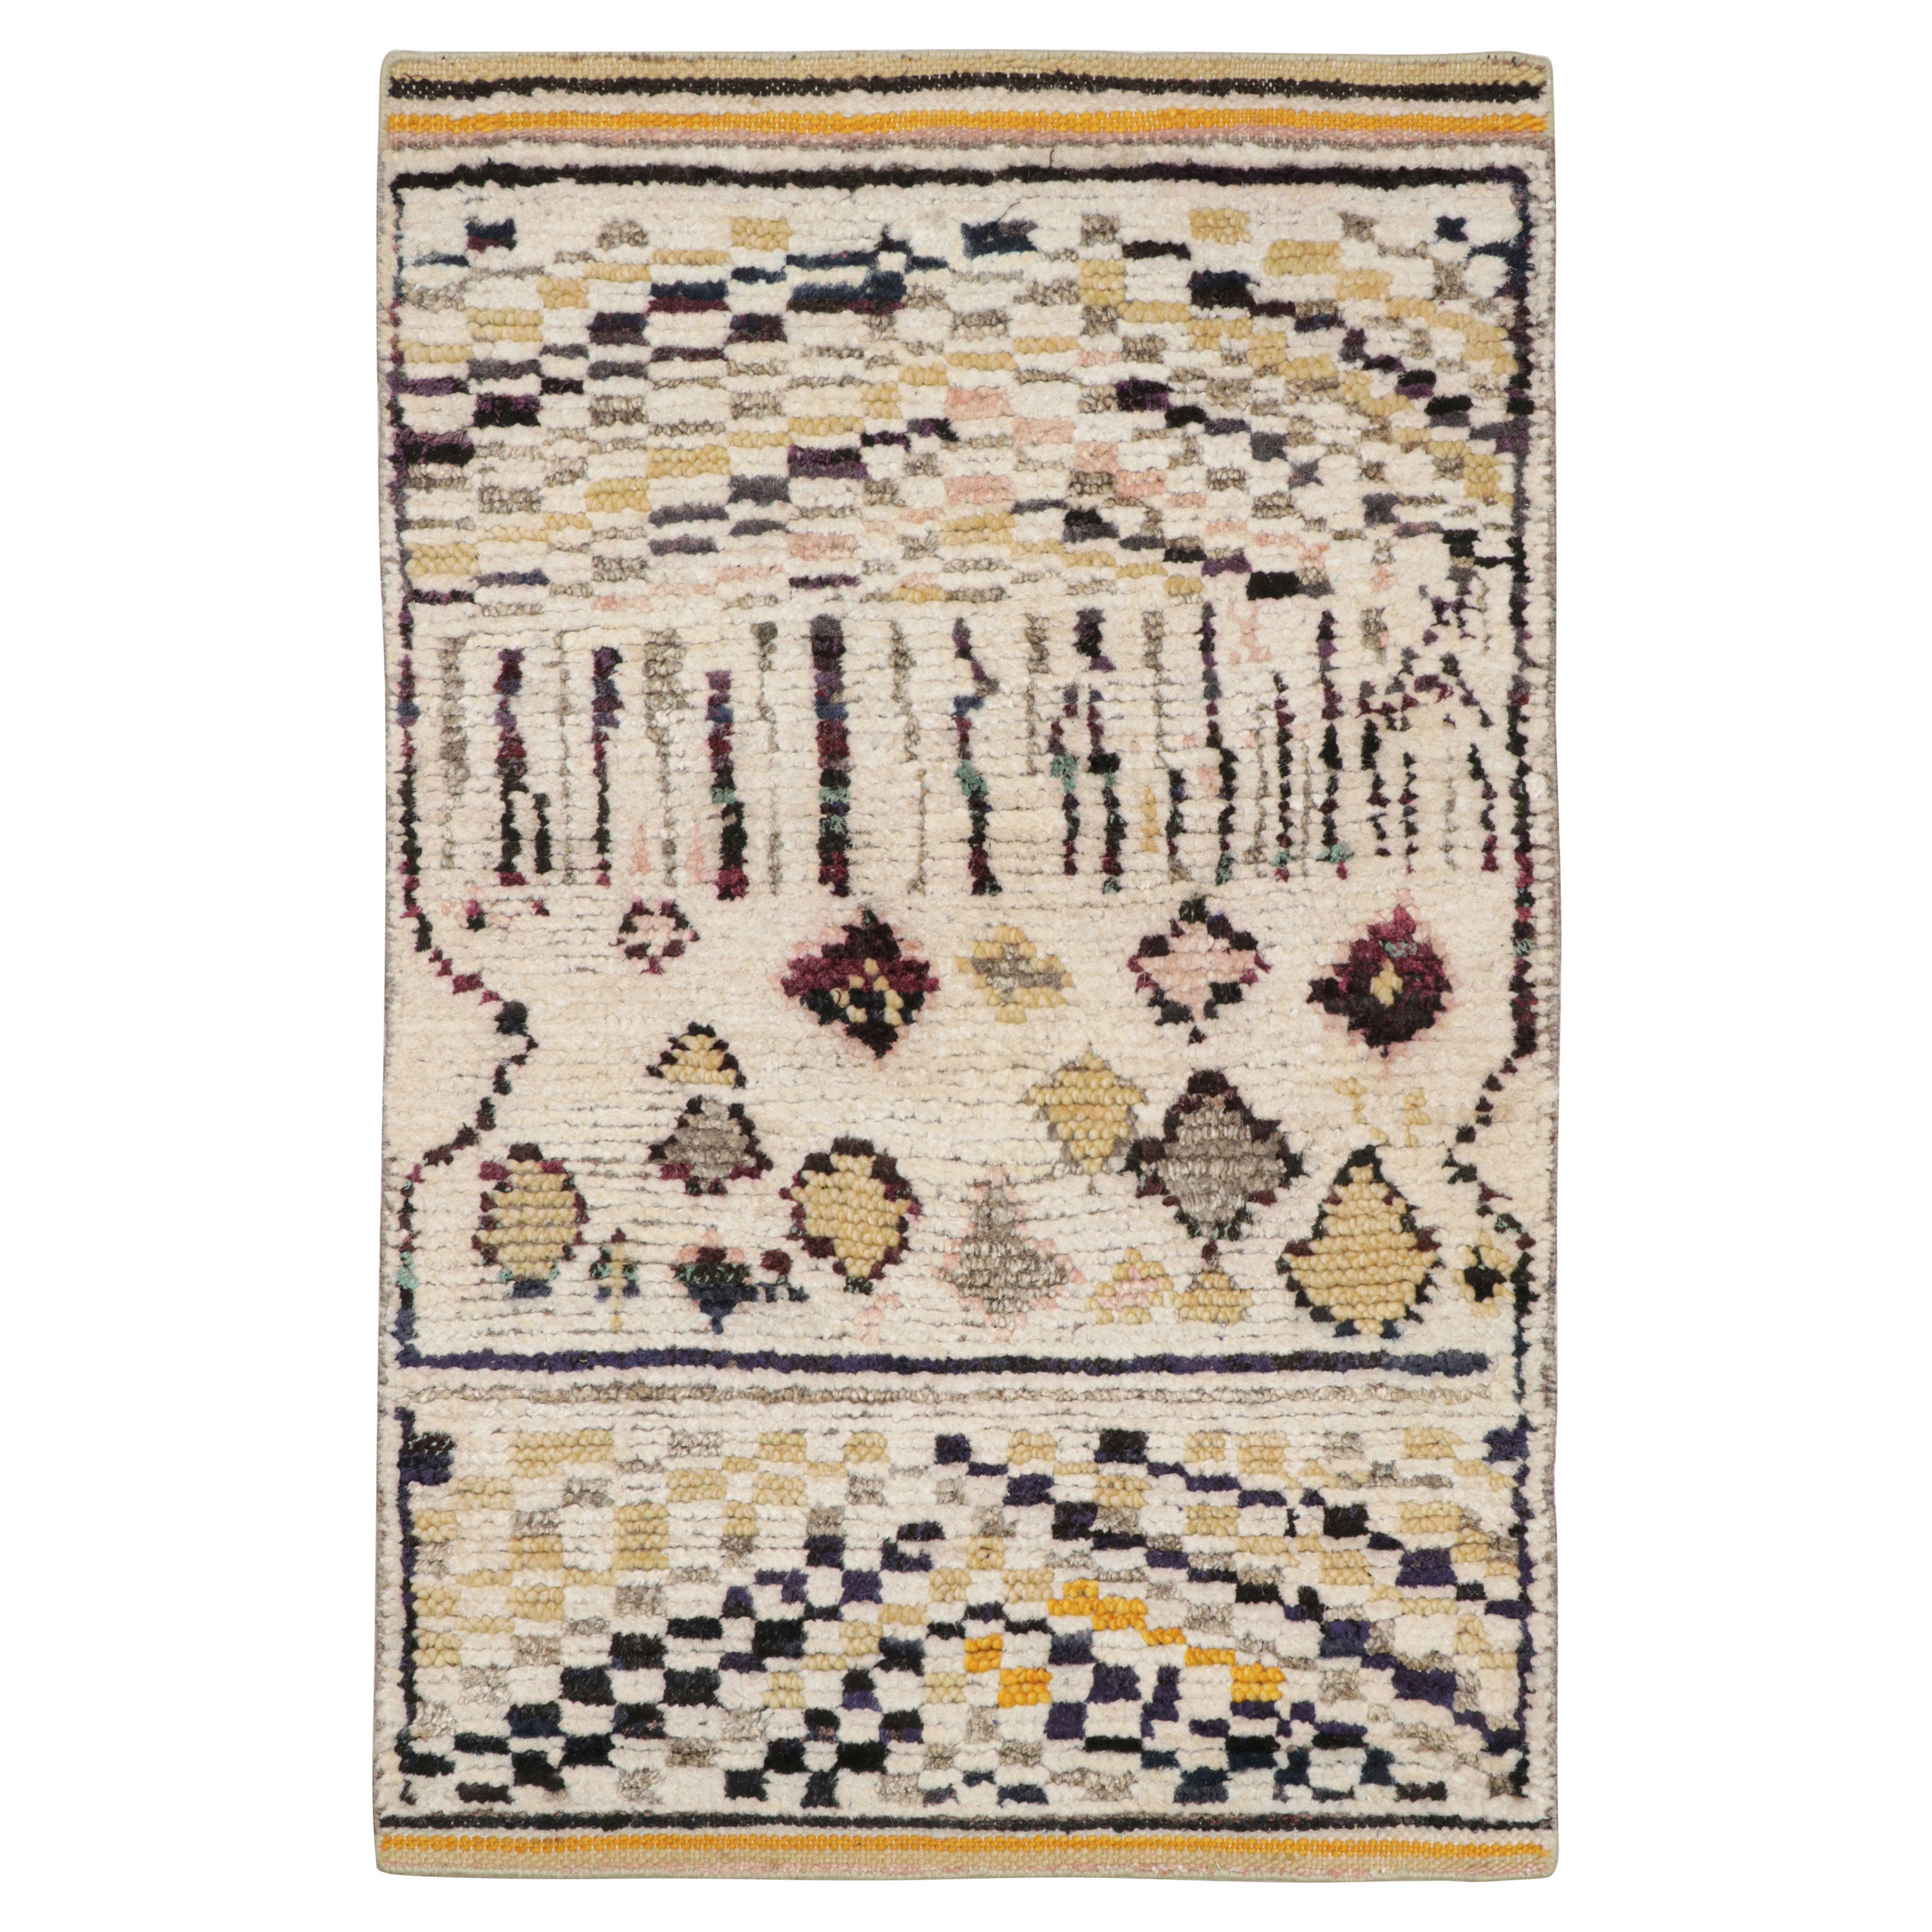 Rug & Kilim’s Moroccan Style Scatter Rug with Colorful Geometric Patterns For Sale